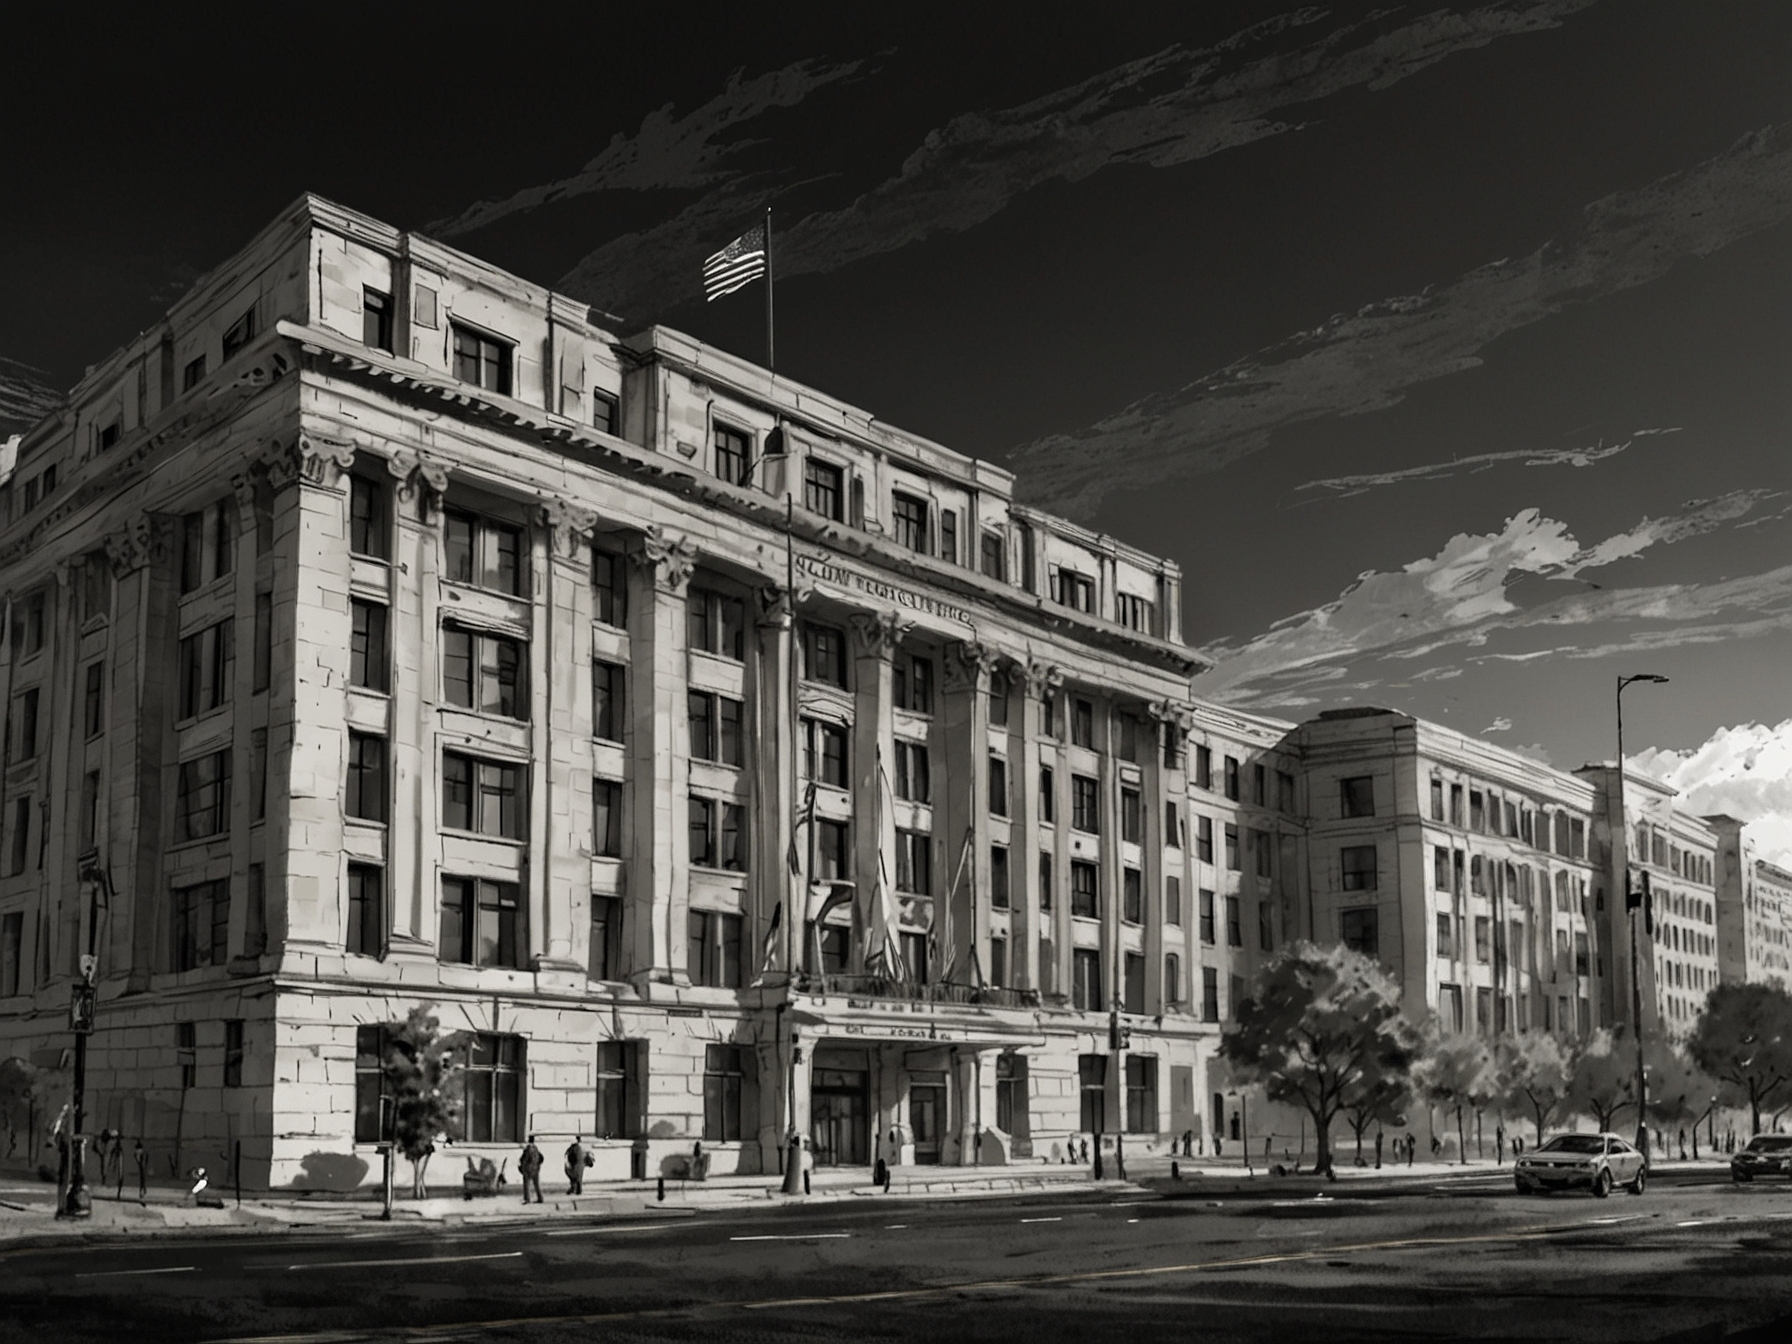 Illustration of the US Department of Commerce building, symbolizing the government's decisive action against Kaspersky due to national security concerns and potential cyber espionage risks.